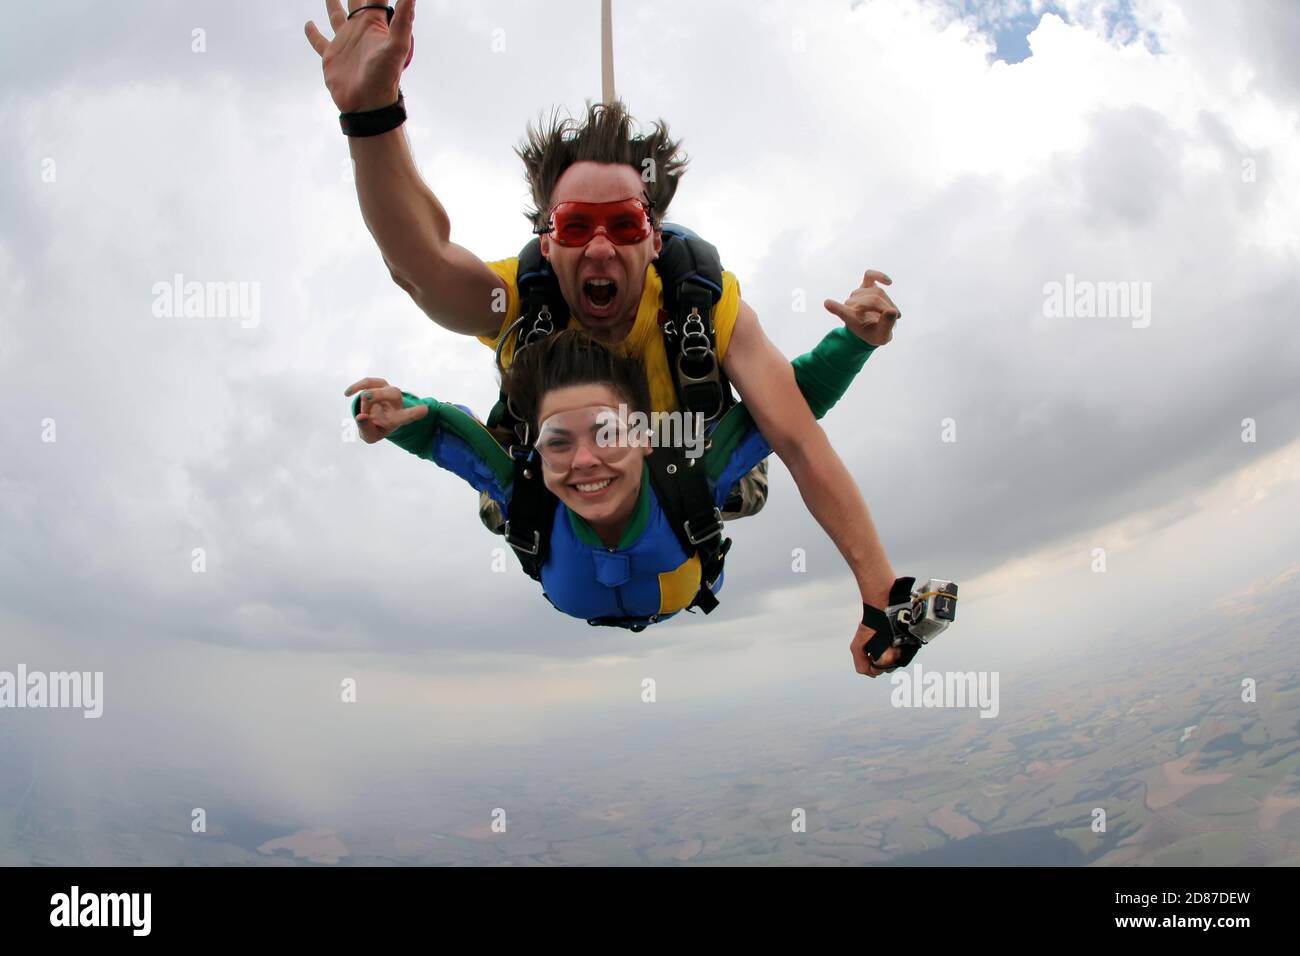 Skydiving tandem happiness on a cloudy day Stock Photo